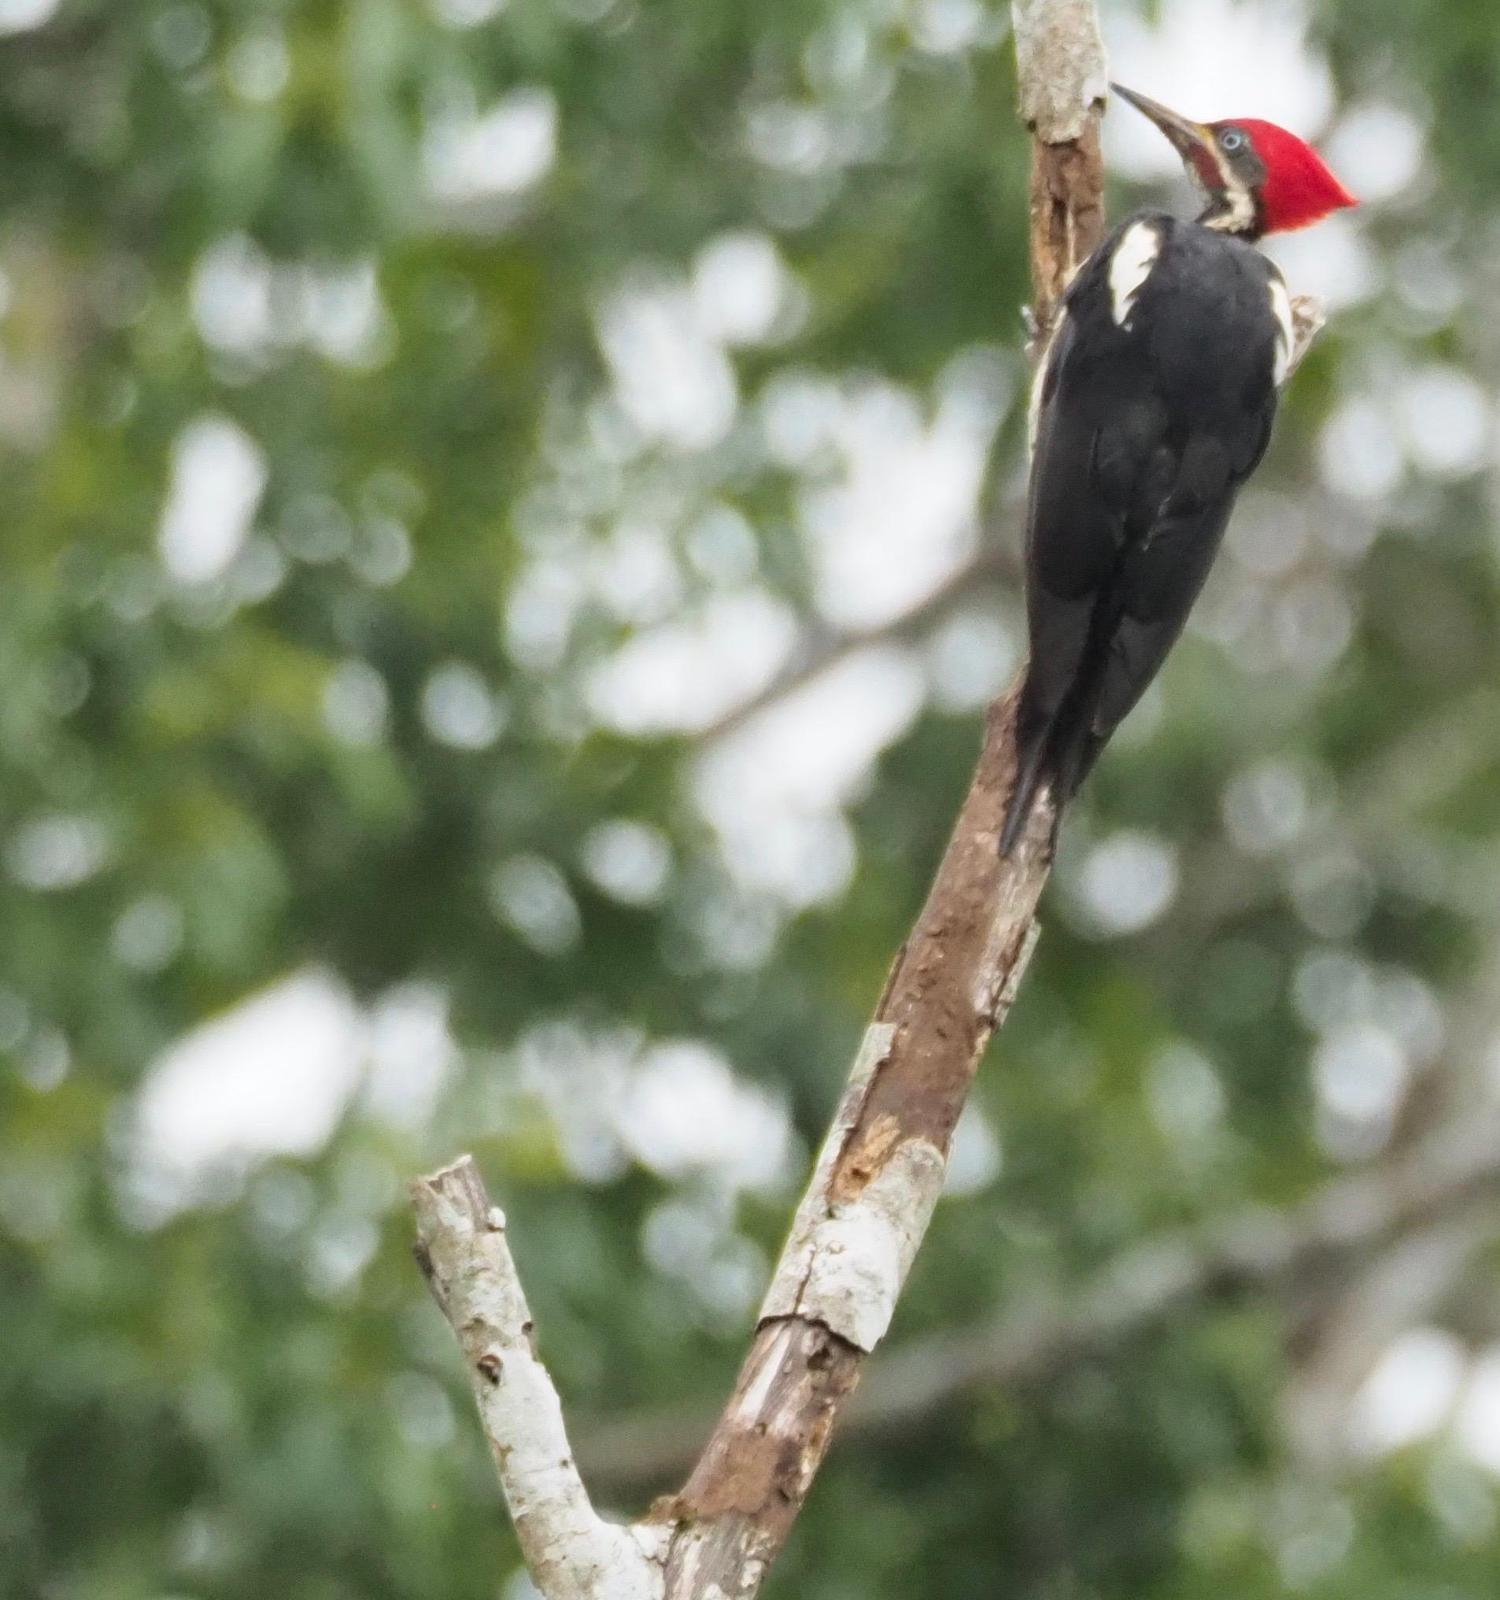 Lineated Woodpecker Photo by Susan Leverton